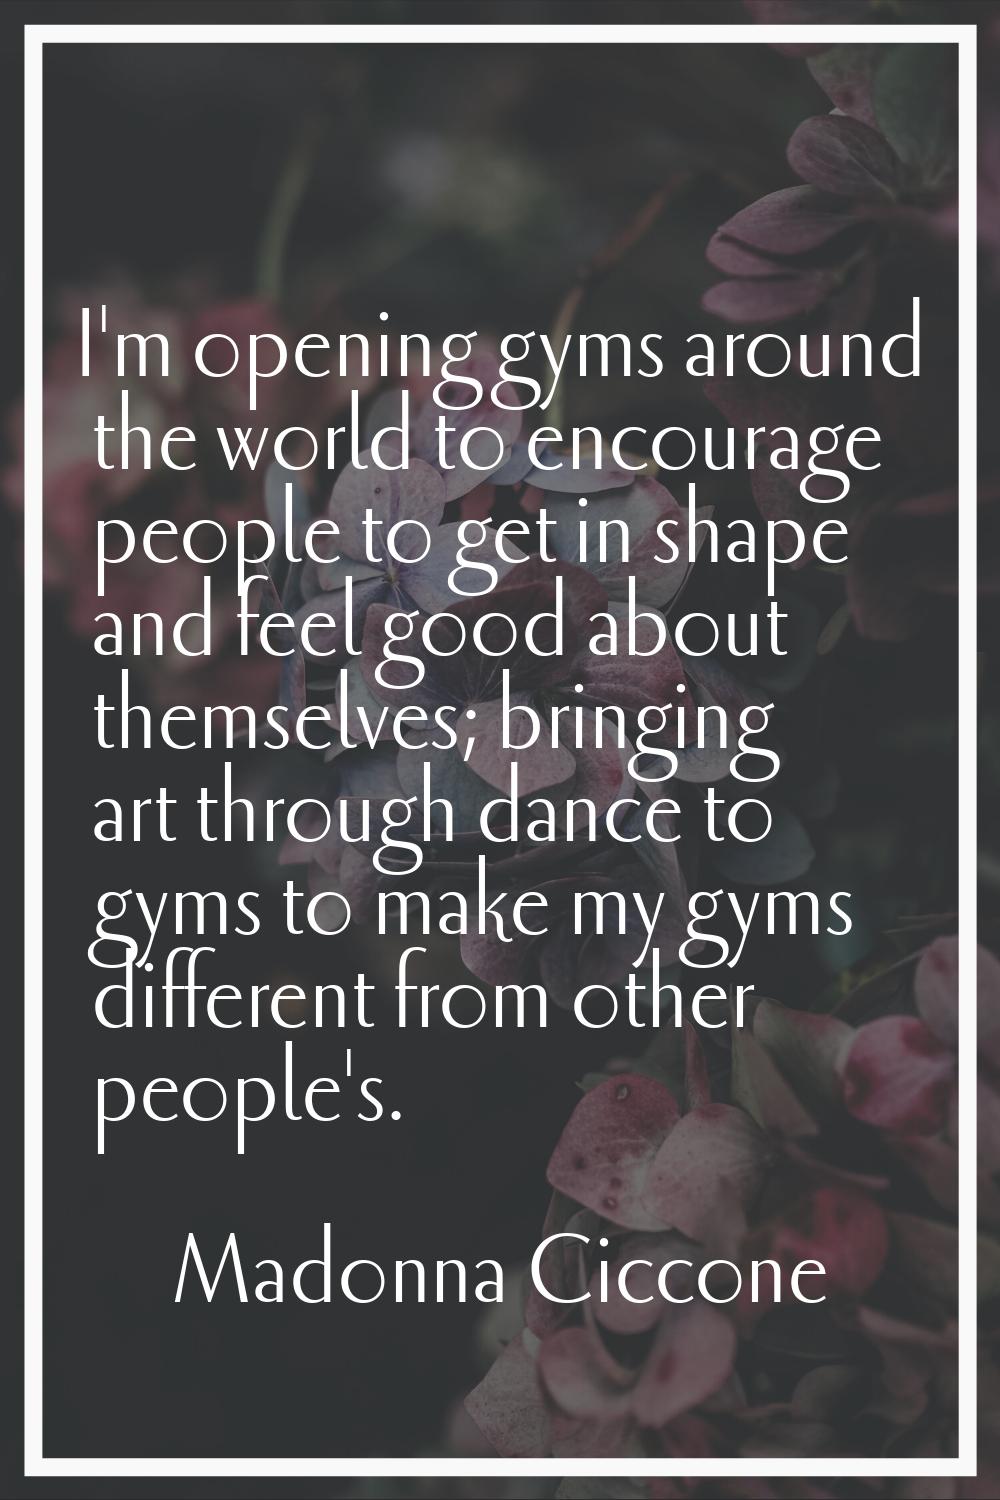 I'm opening gyms around the world to encourage people to get in shape and feel good about themselve